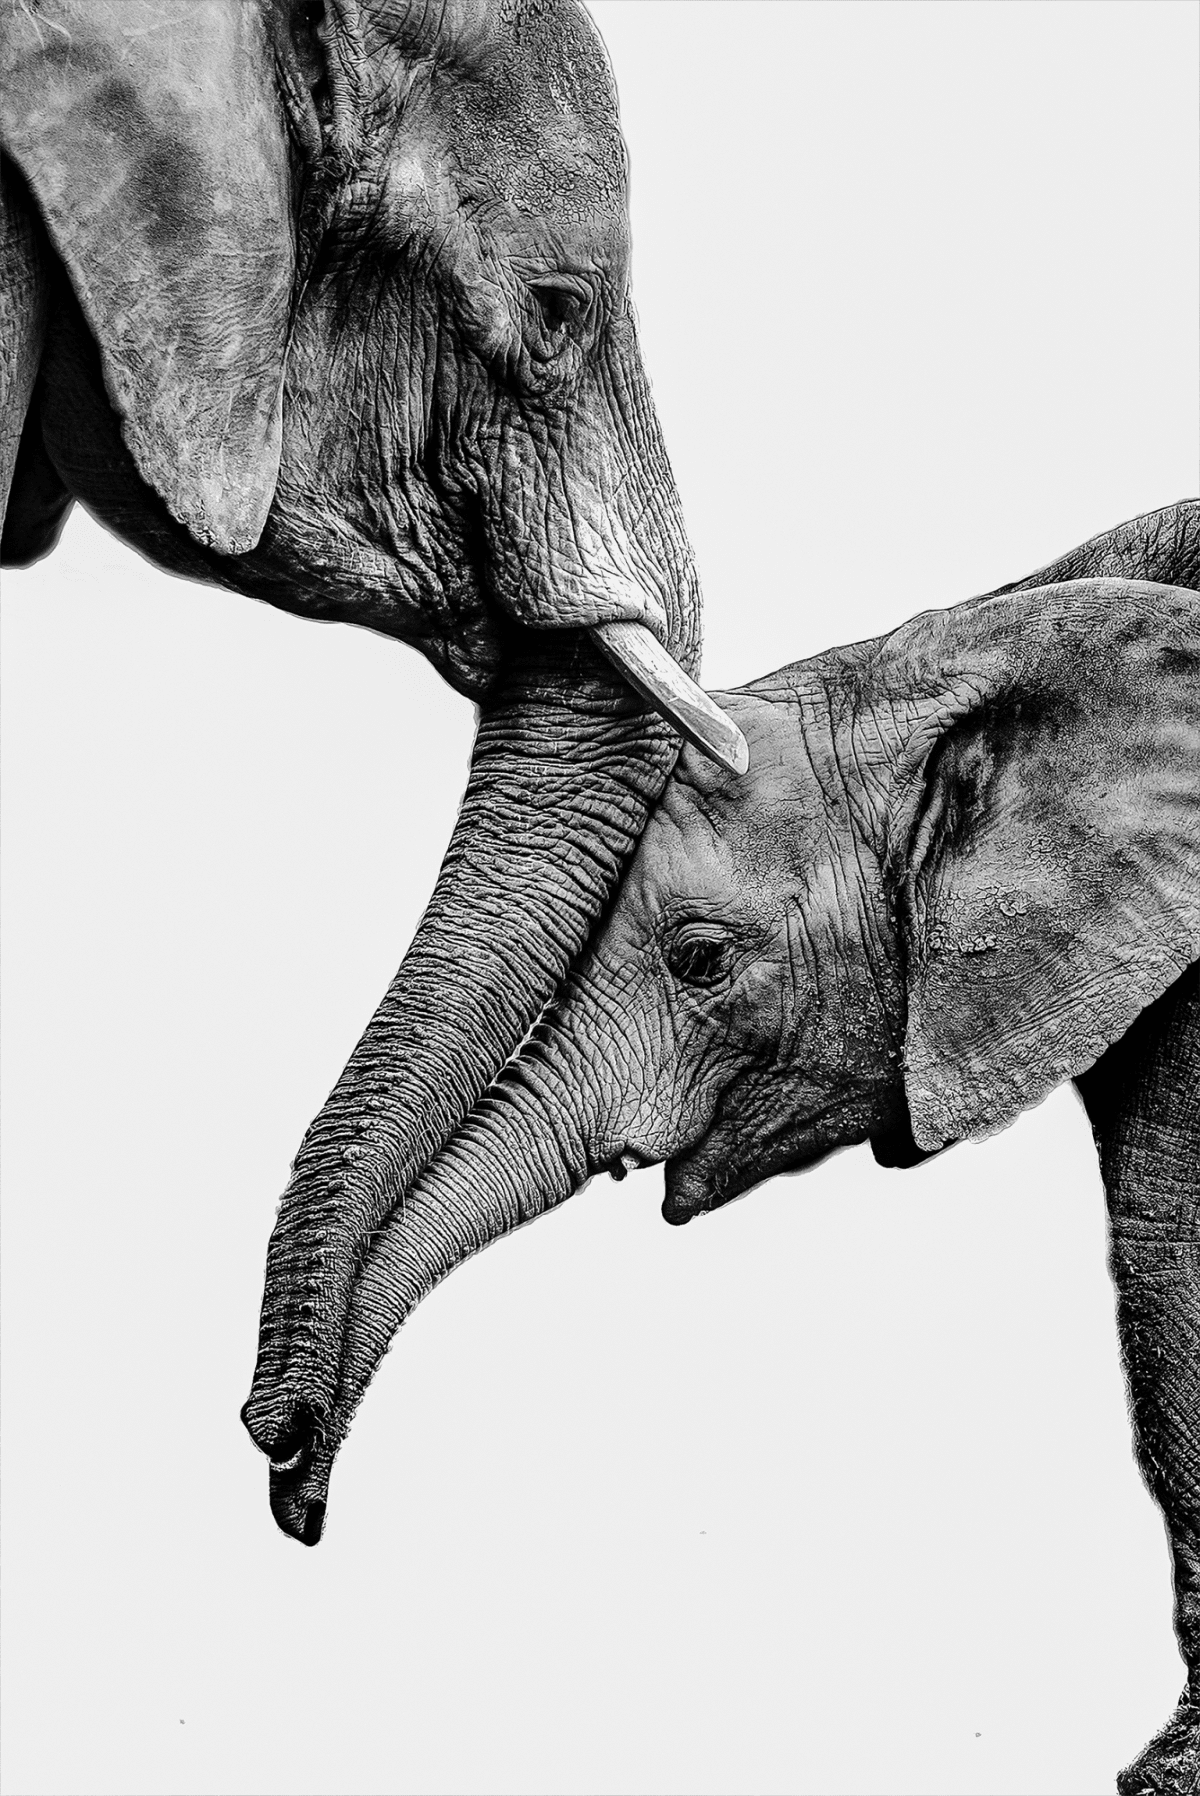 Black and white portrait of a mother elephant and a baby elephant rubbing trunks